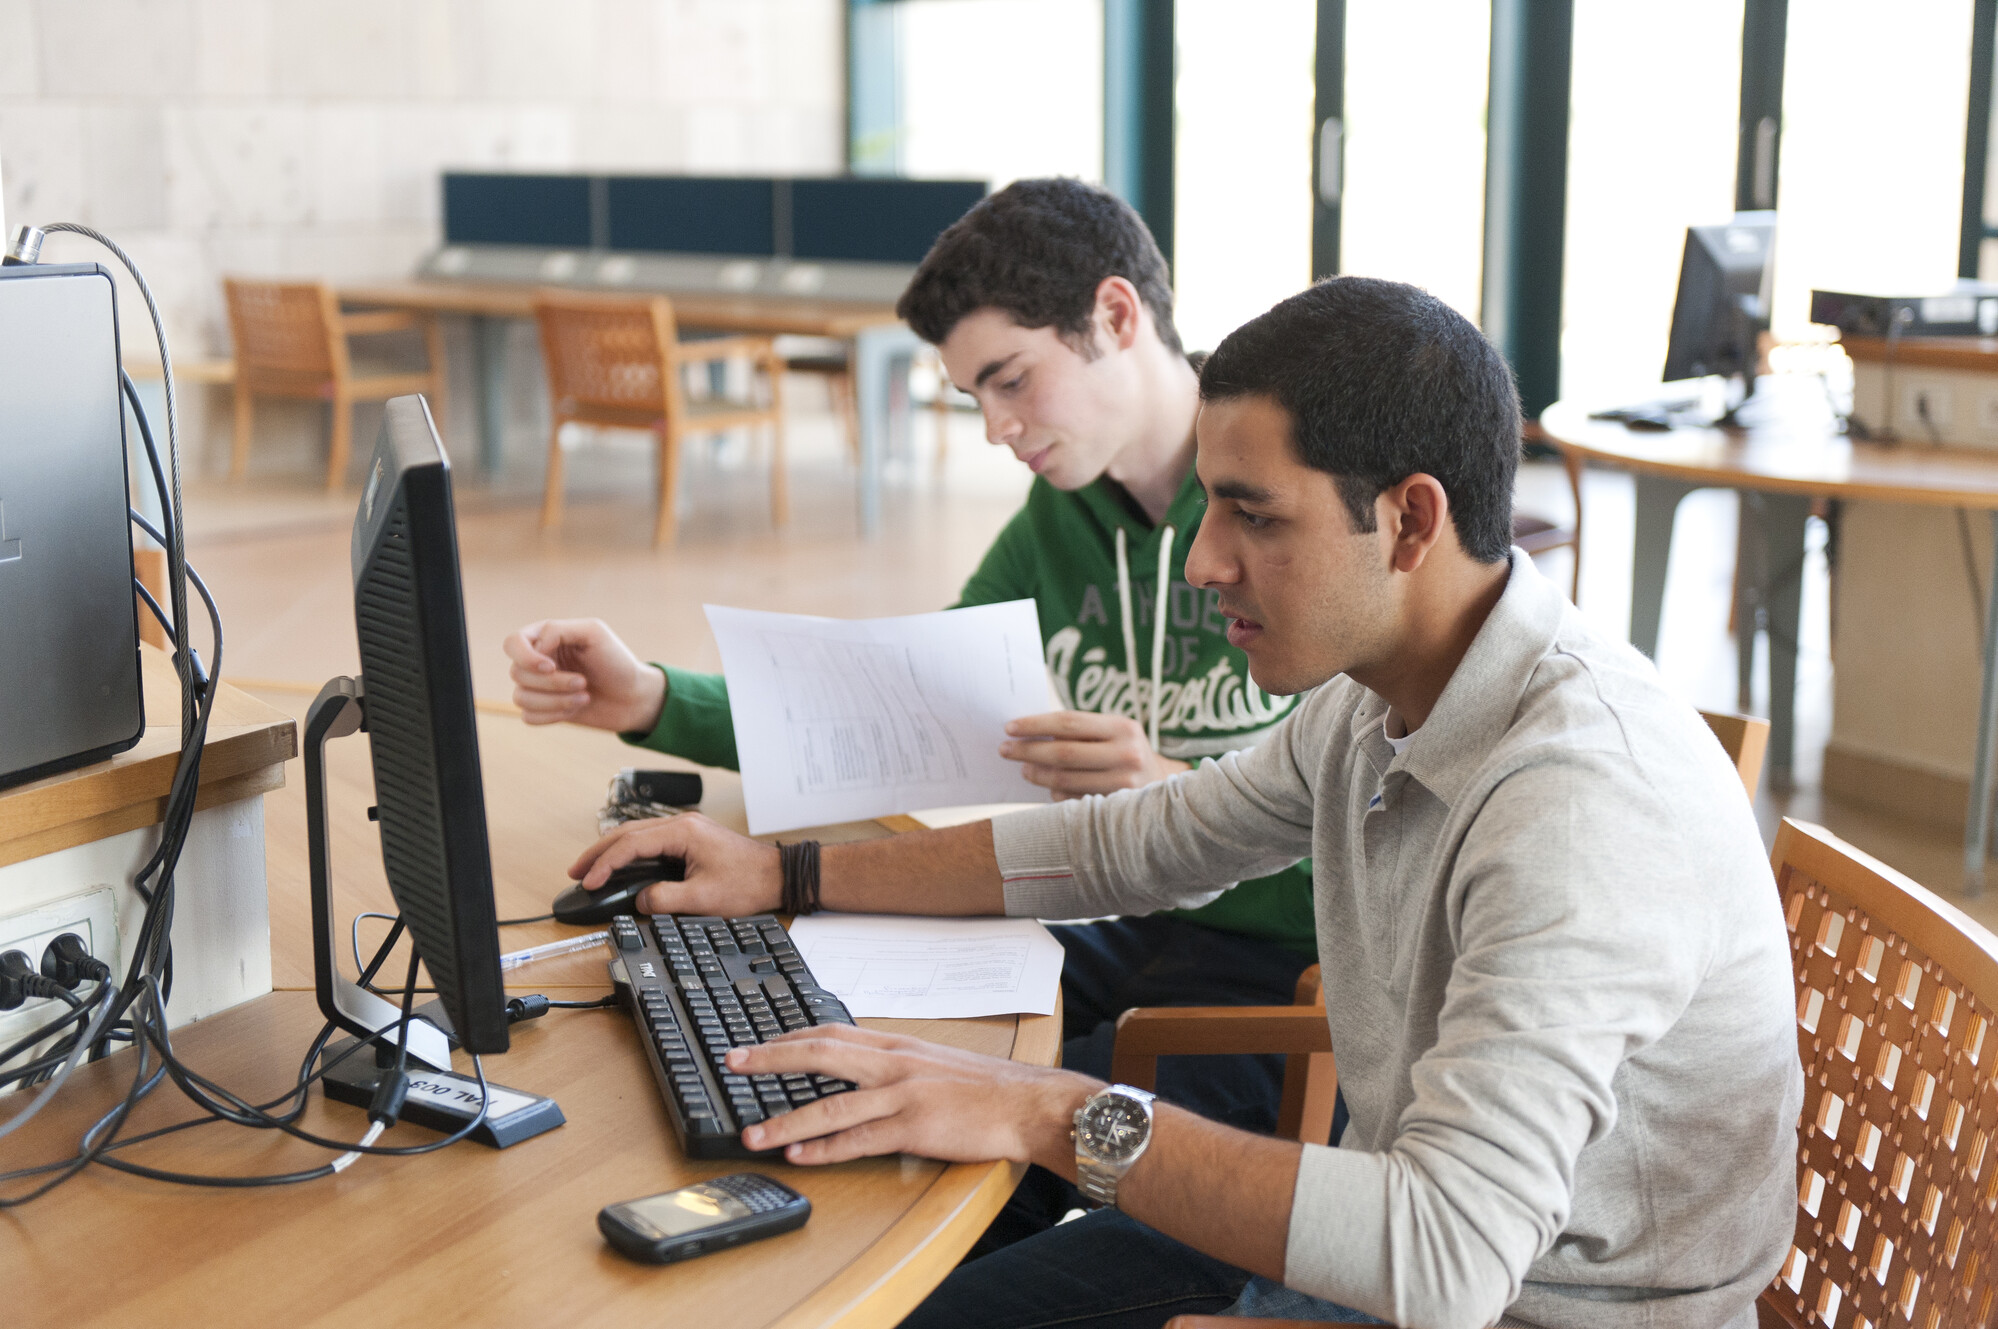 students working on computers in the auc library